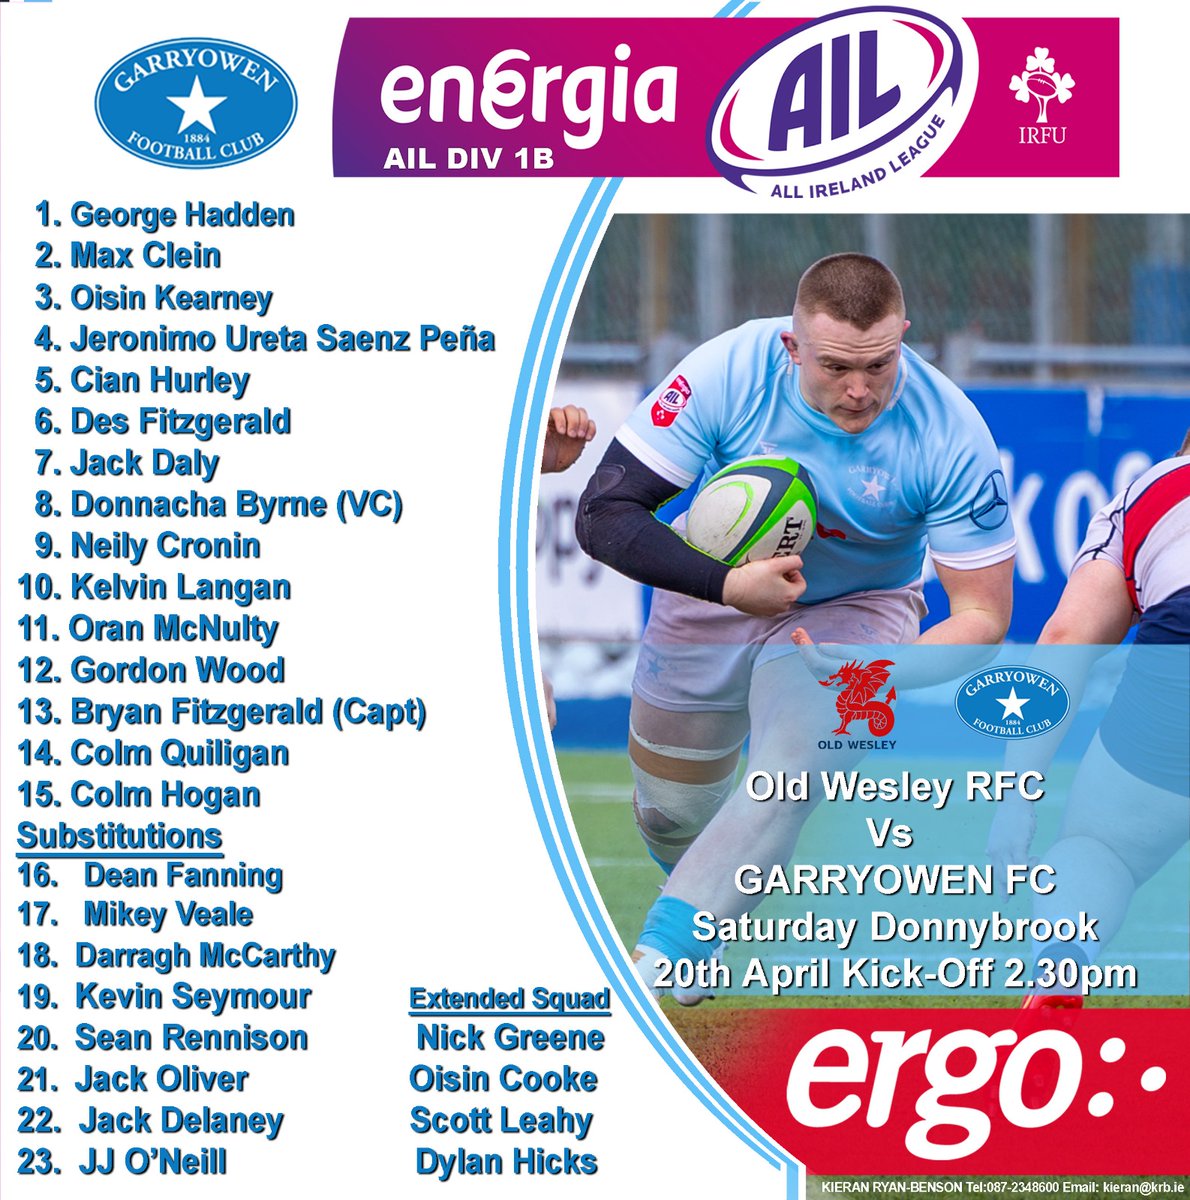 Garryowen Team for todays AIL 1A/1B Playoff Semi-final with @oldwesleyrfc in @energiaireland Park.. Best of luck lads, up and under, here we go!!!

#GinG #AIL #rugby #Limerick #munster